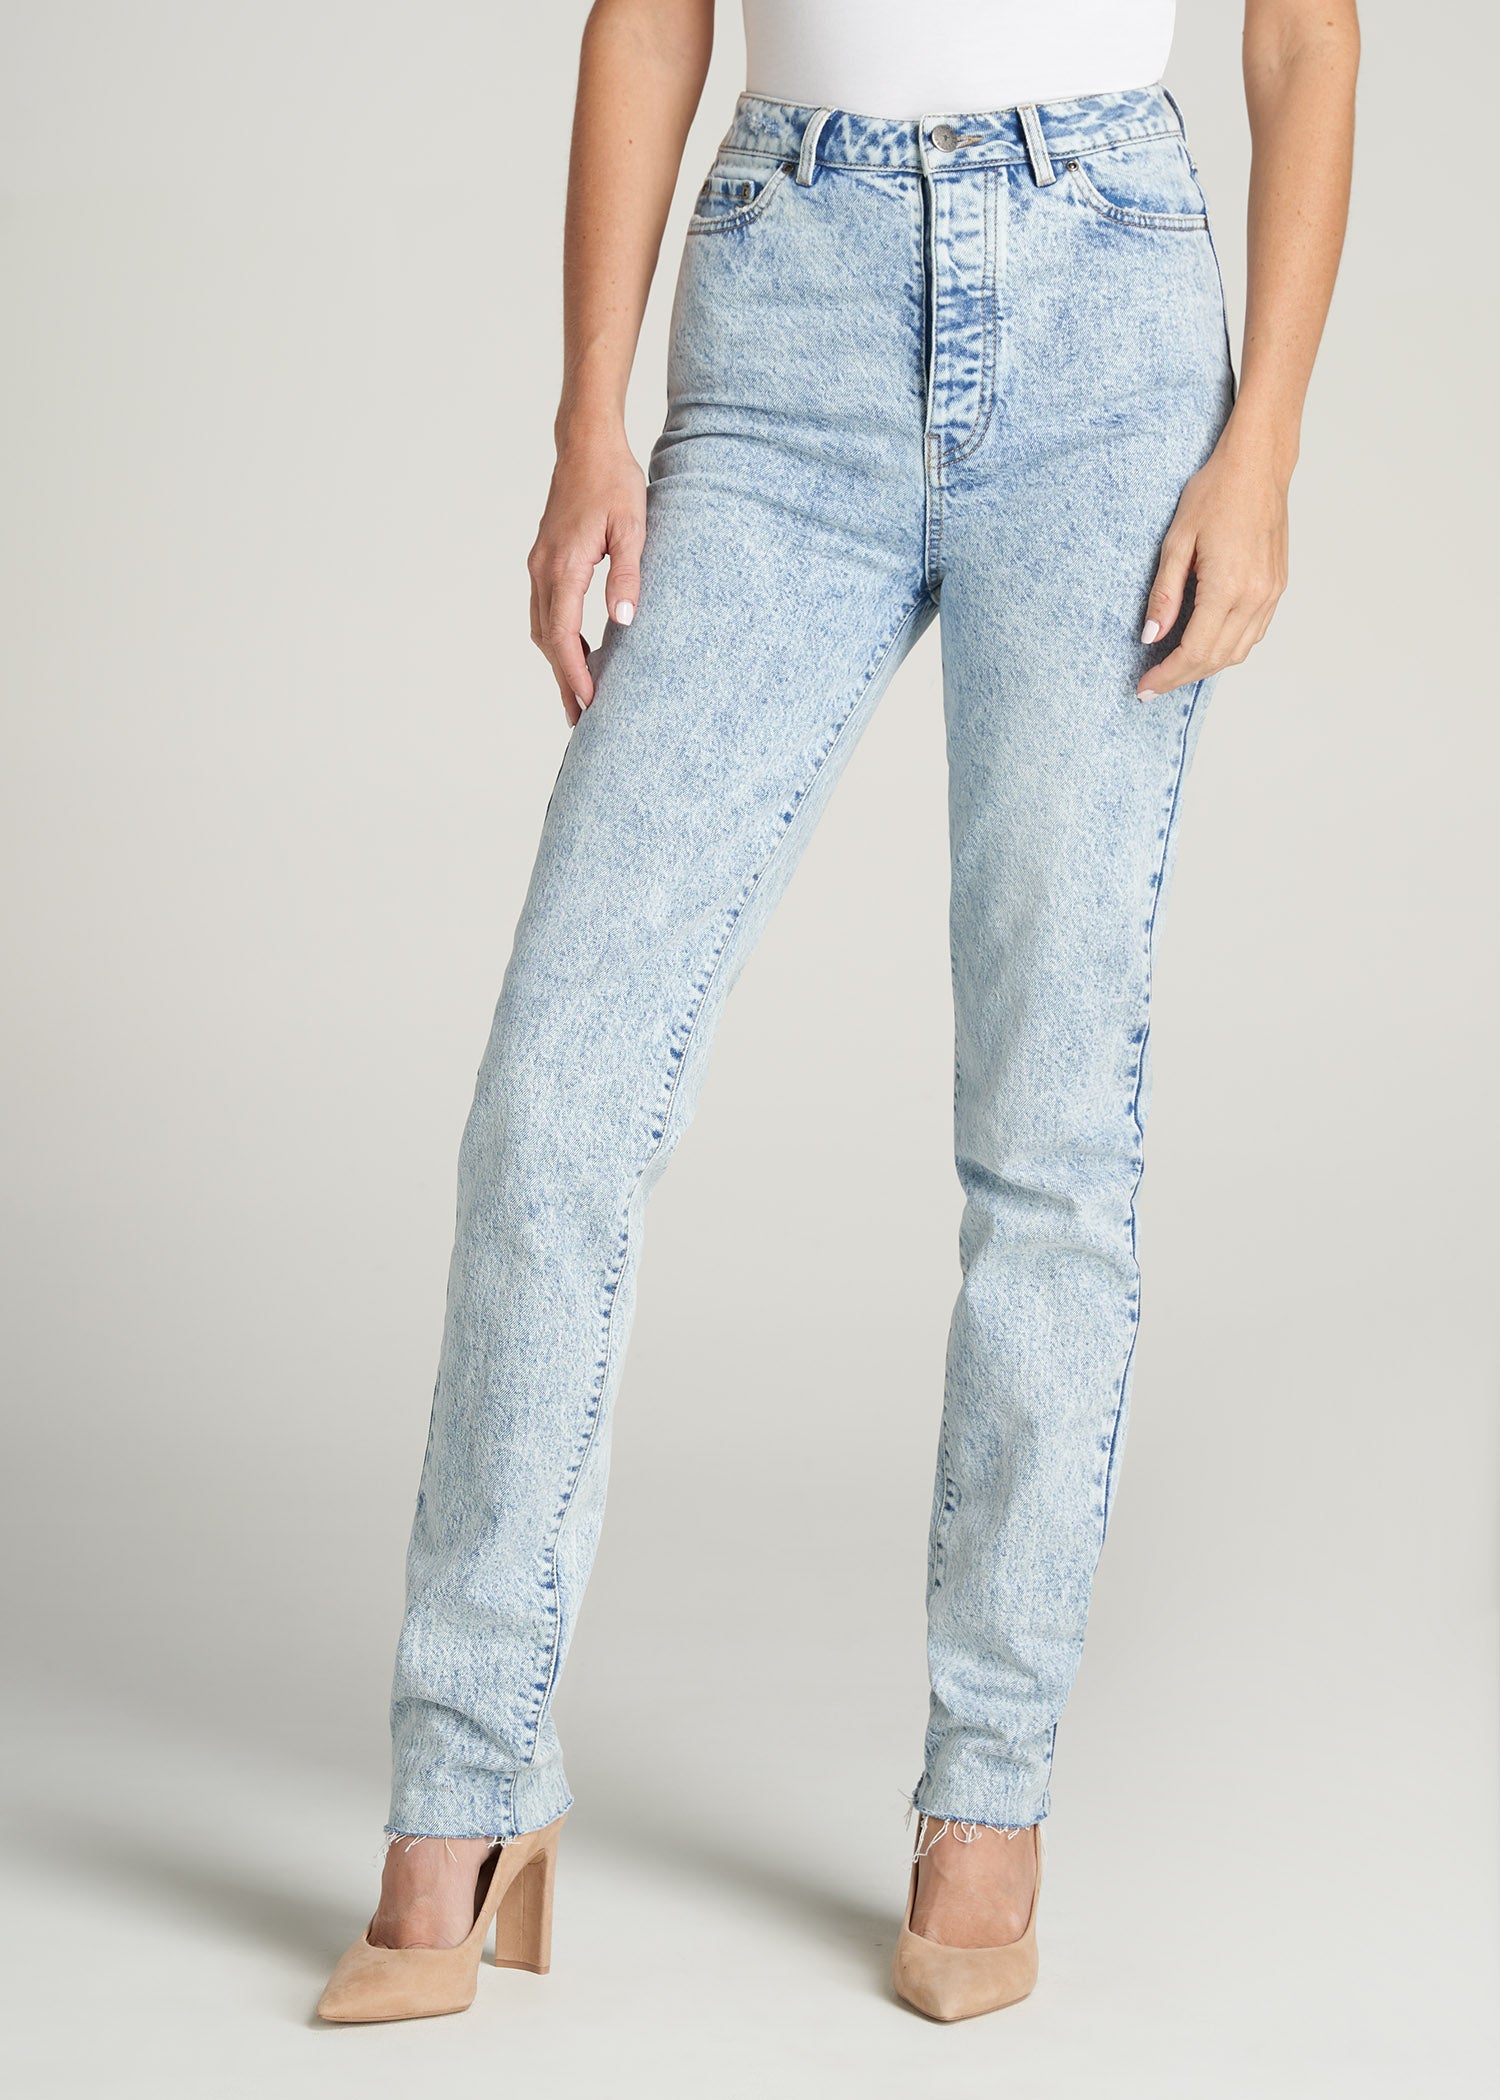 Stone Washed Jeans for Tall Women